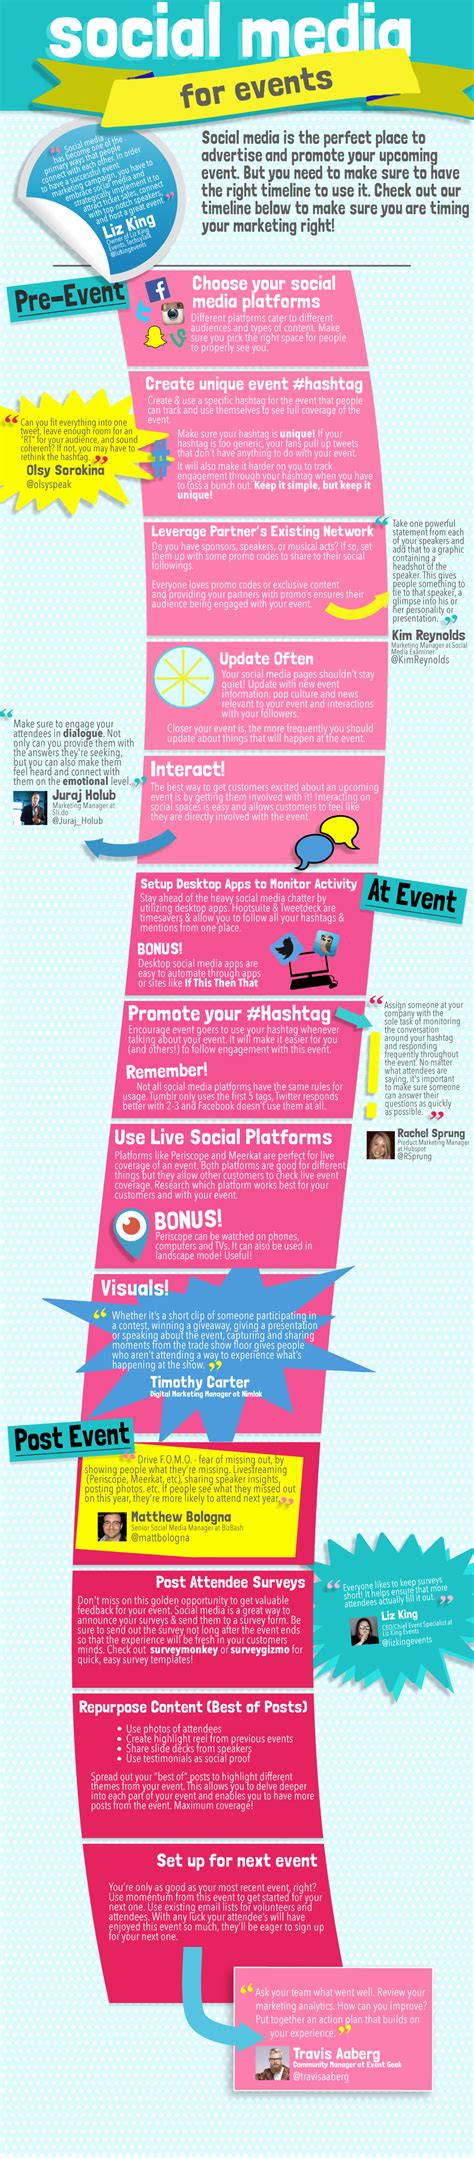 Social Media For Events Timeline Infographic Ticketbud Event